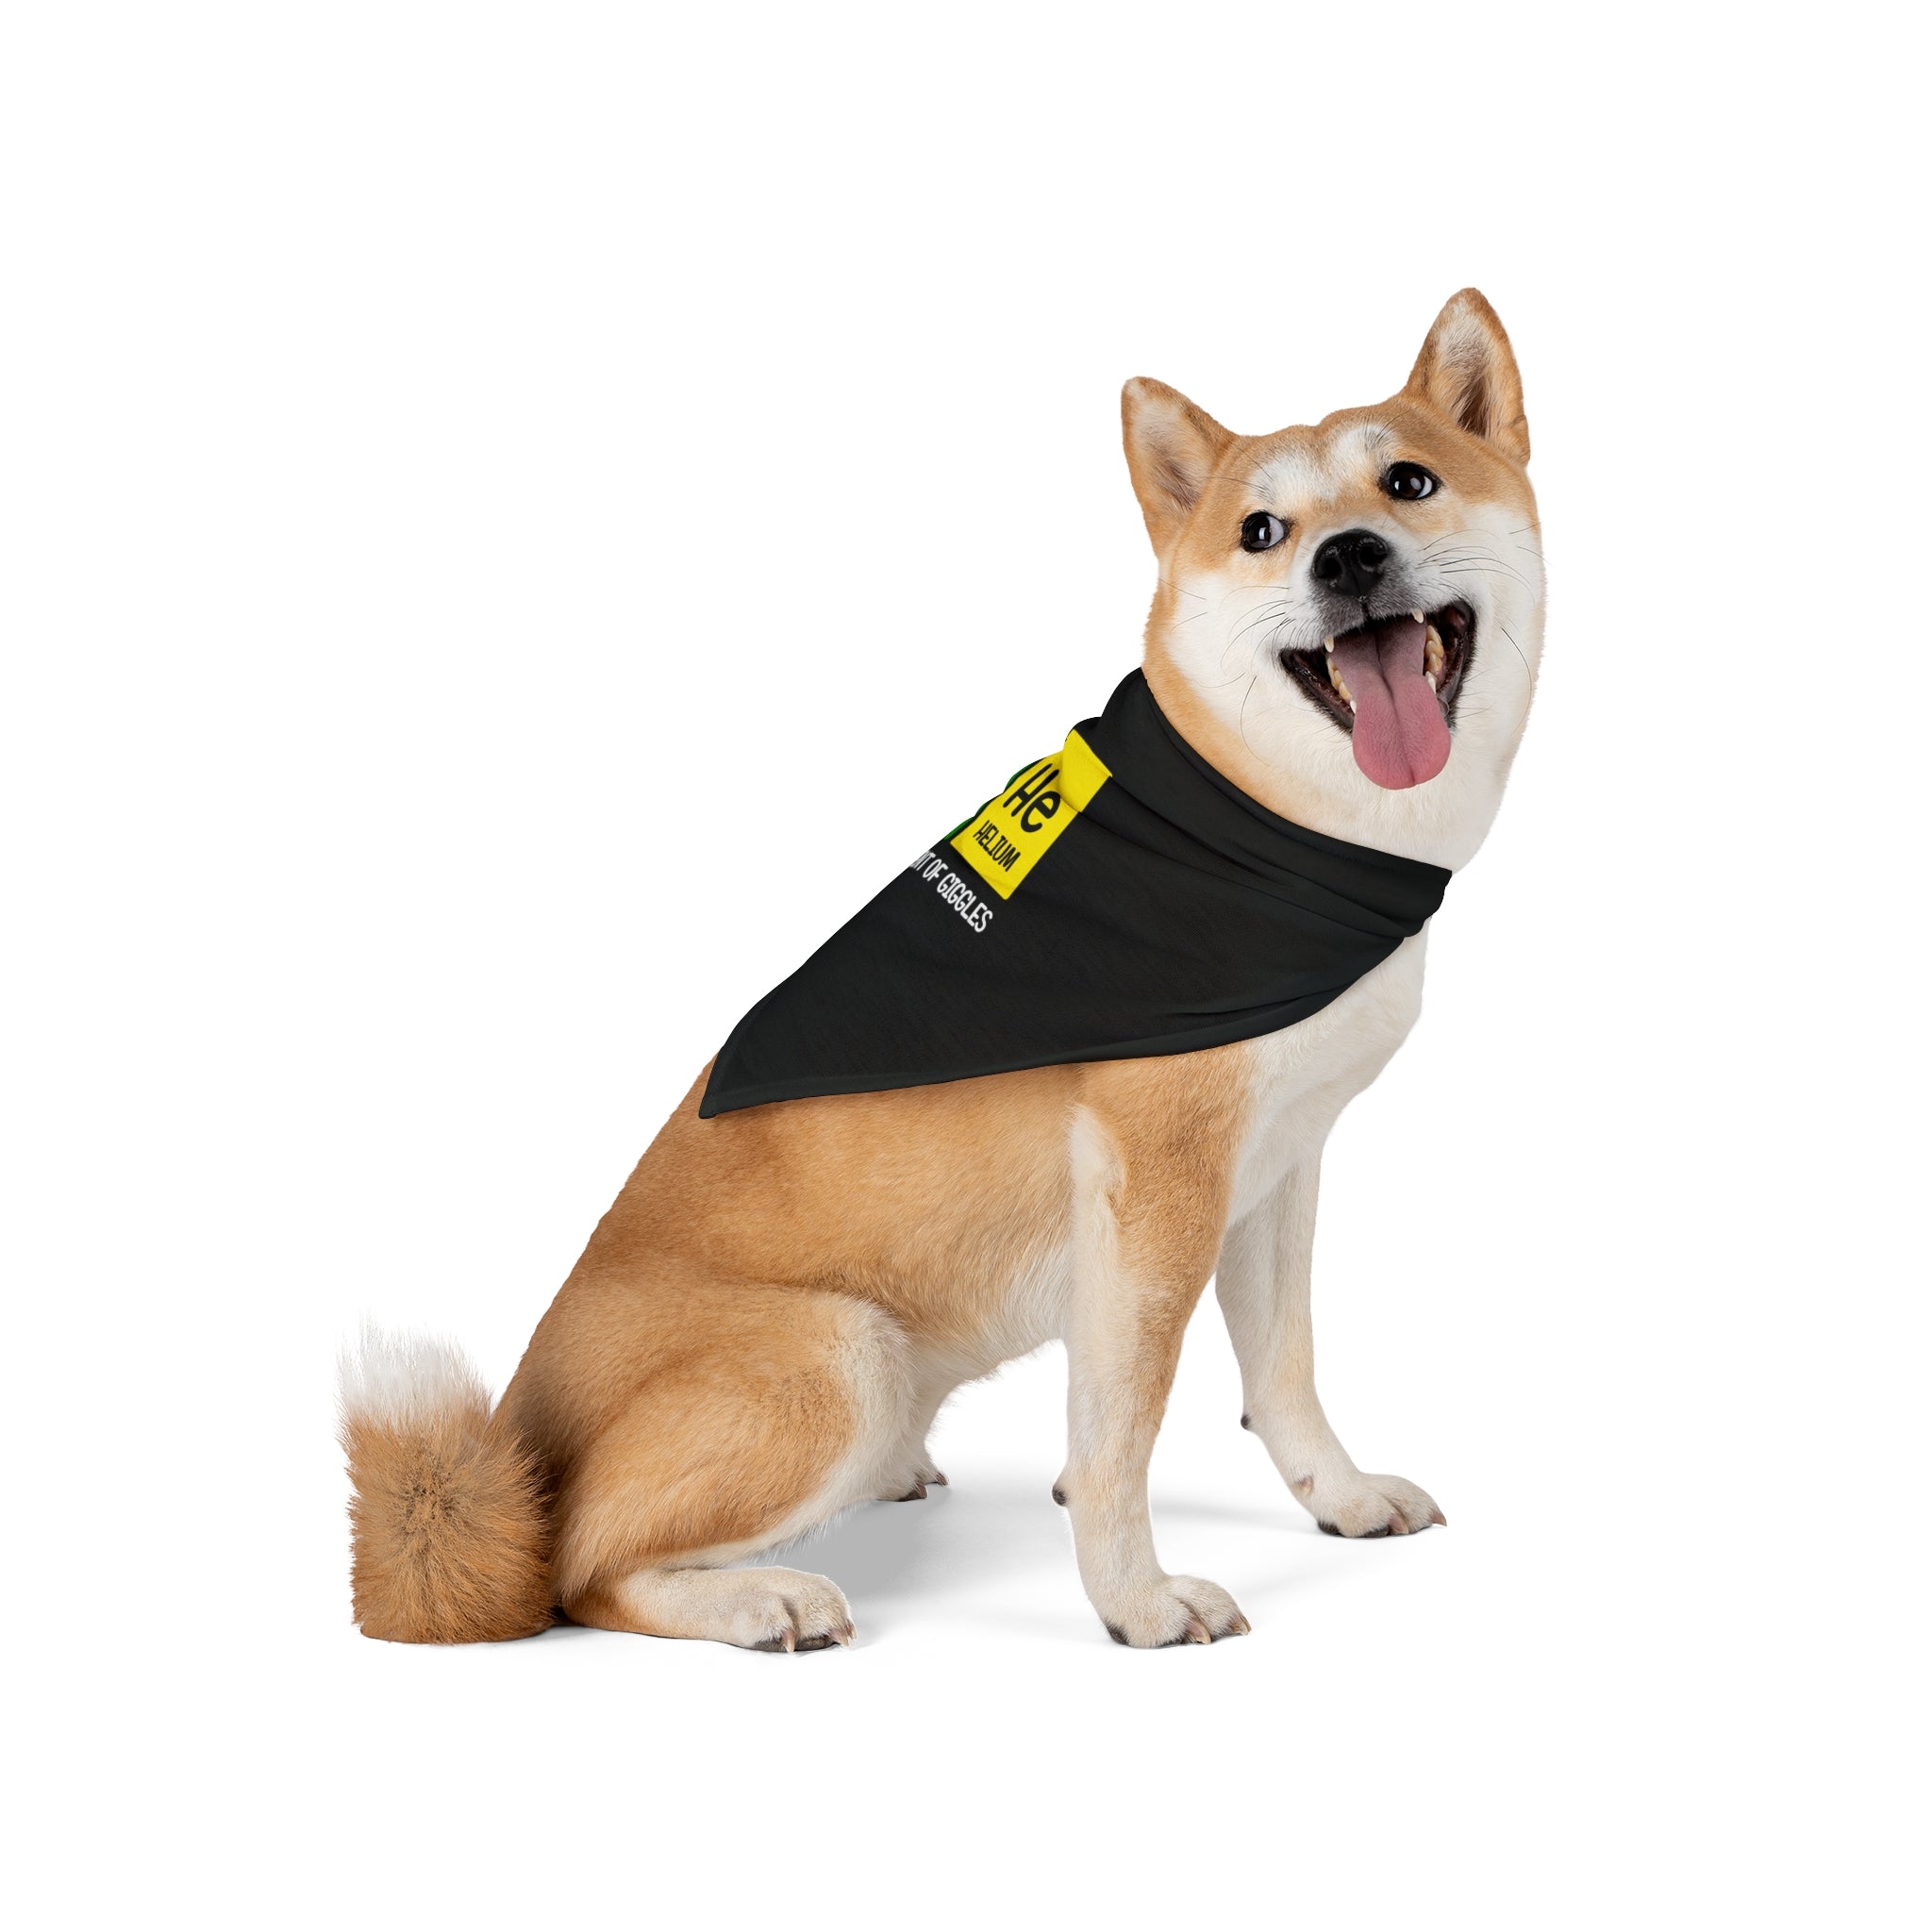 A Shiba Inu dog sits and looks sideways with its tongue out, sporting a He-He - Pet Bandana black and yellow bandana made from soft-spun polyester.